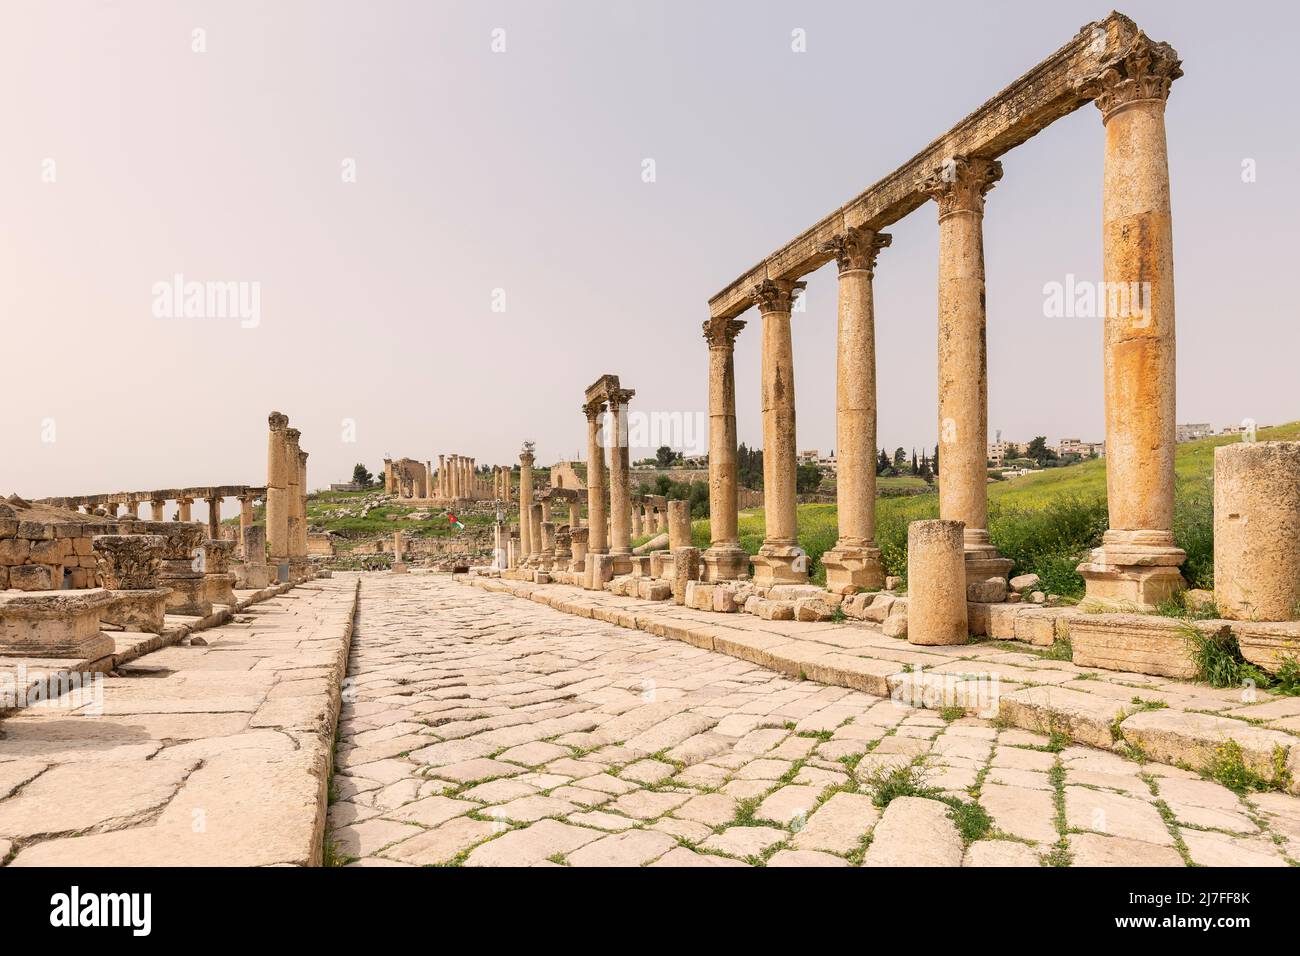 Temple of Artemis in the ancient Roman city of Gerasa, preset-day Jerash, Jordan. It is located about 48 km north of the capital Amman. Stock Photo